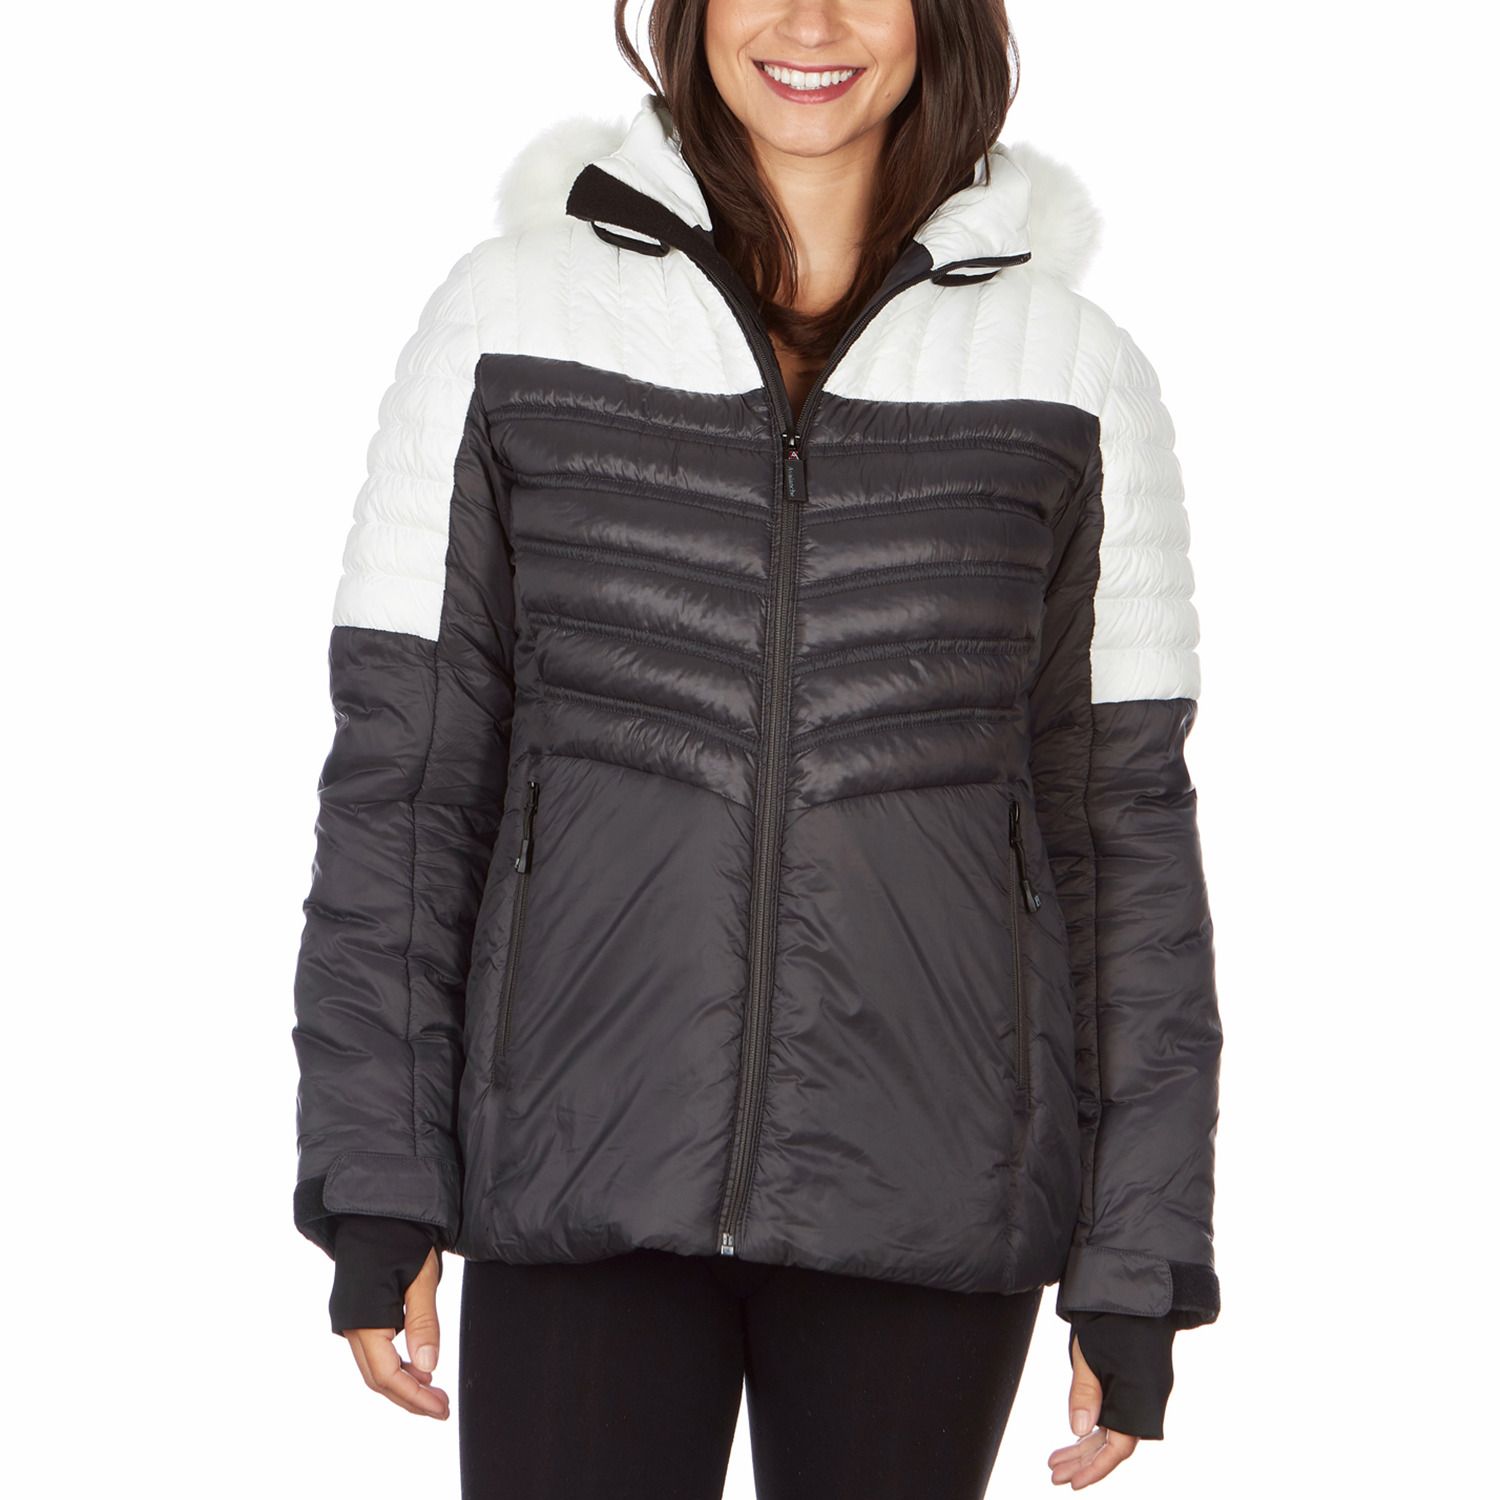 plus size quilted jacket with hood